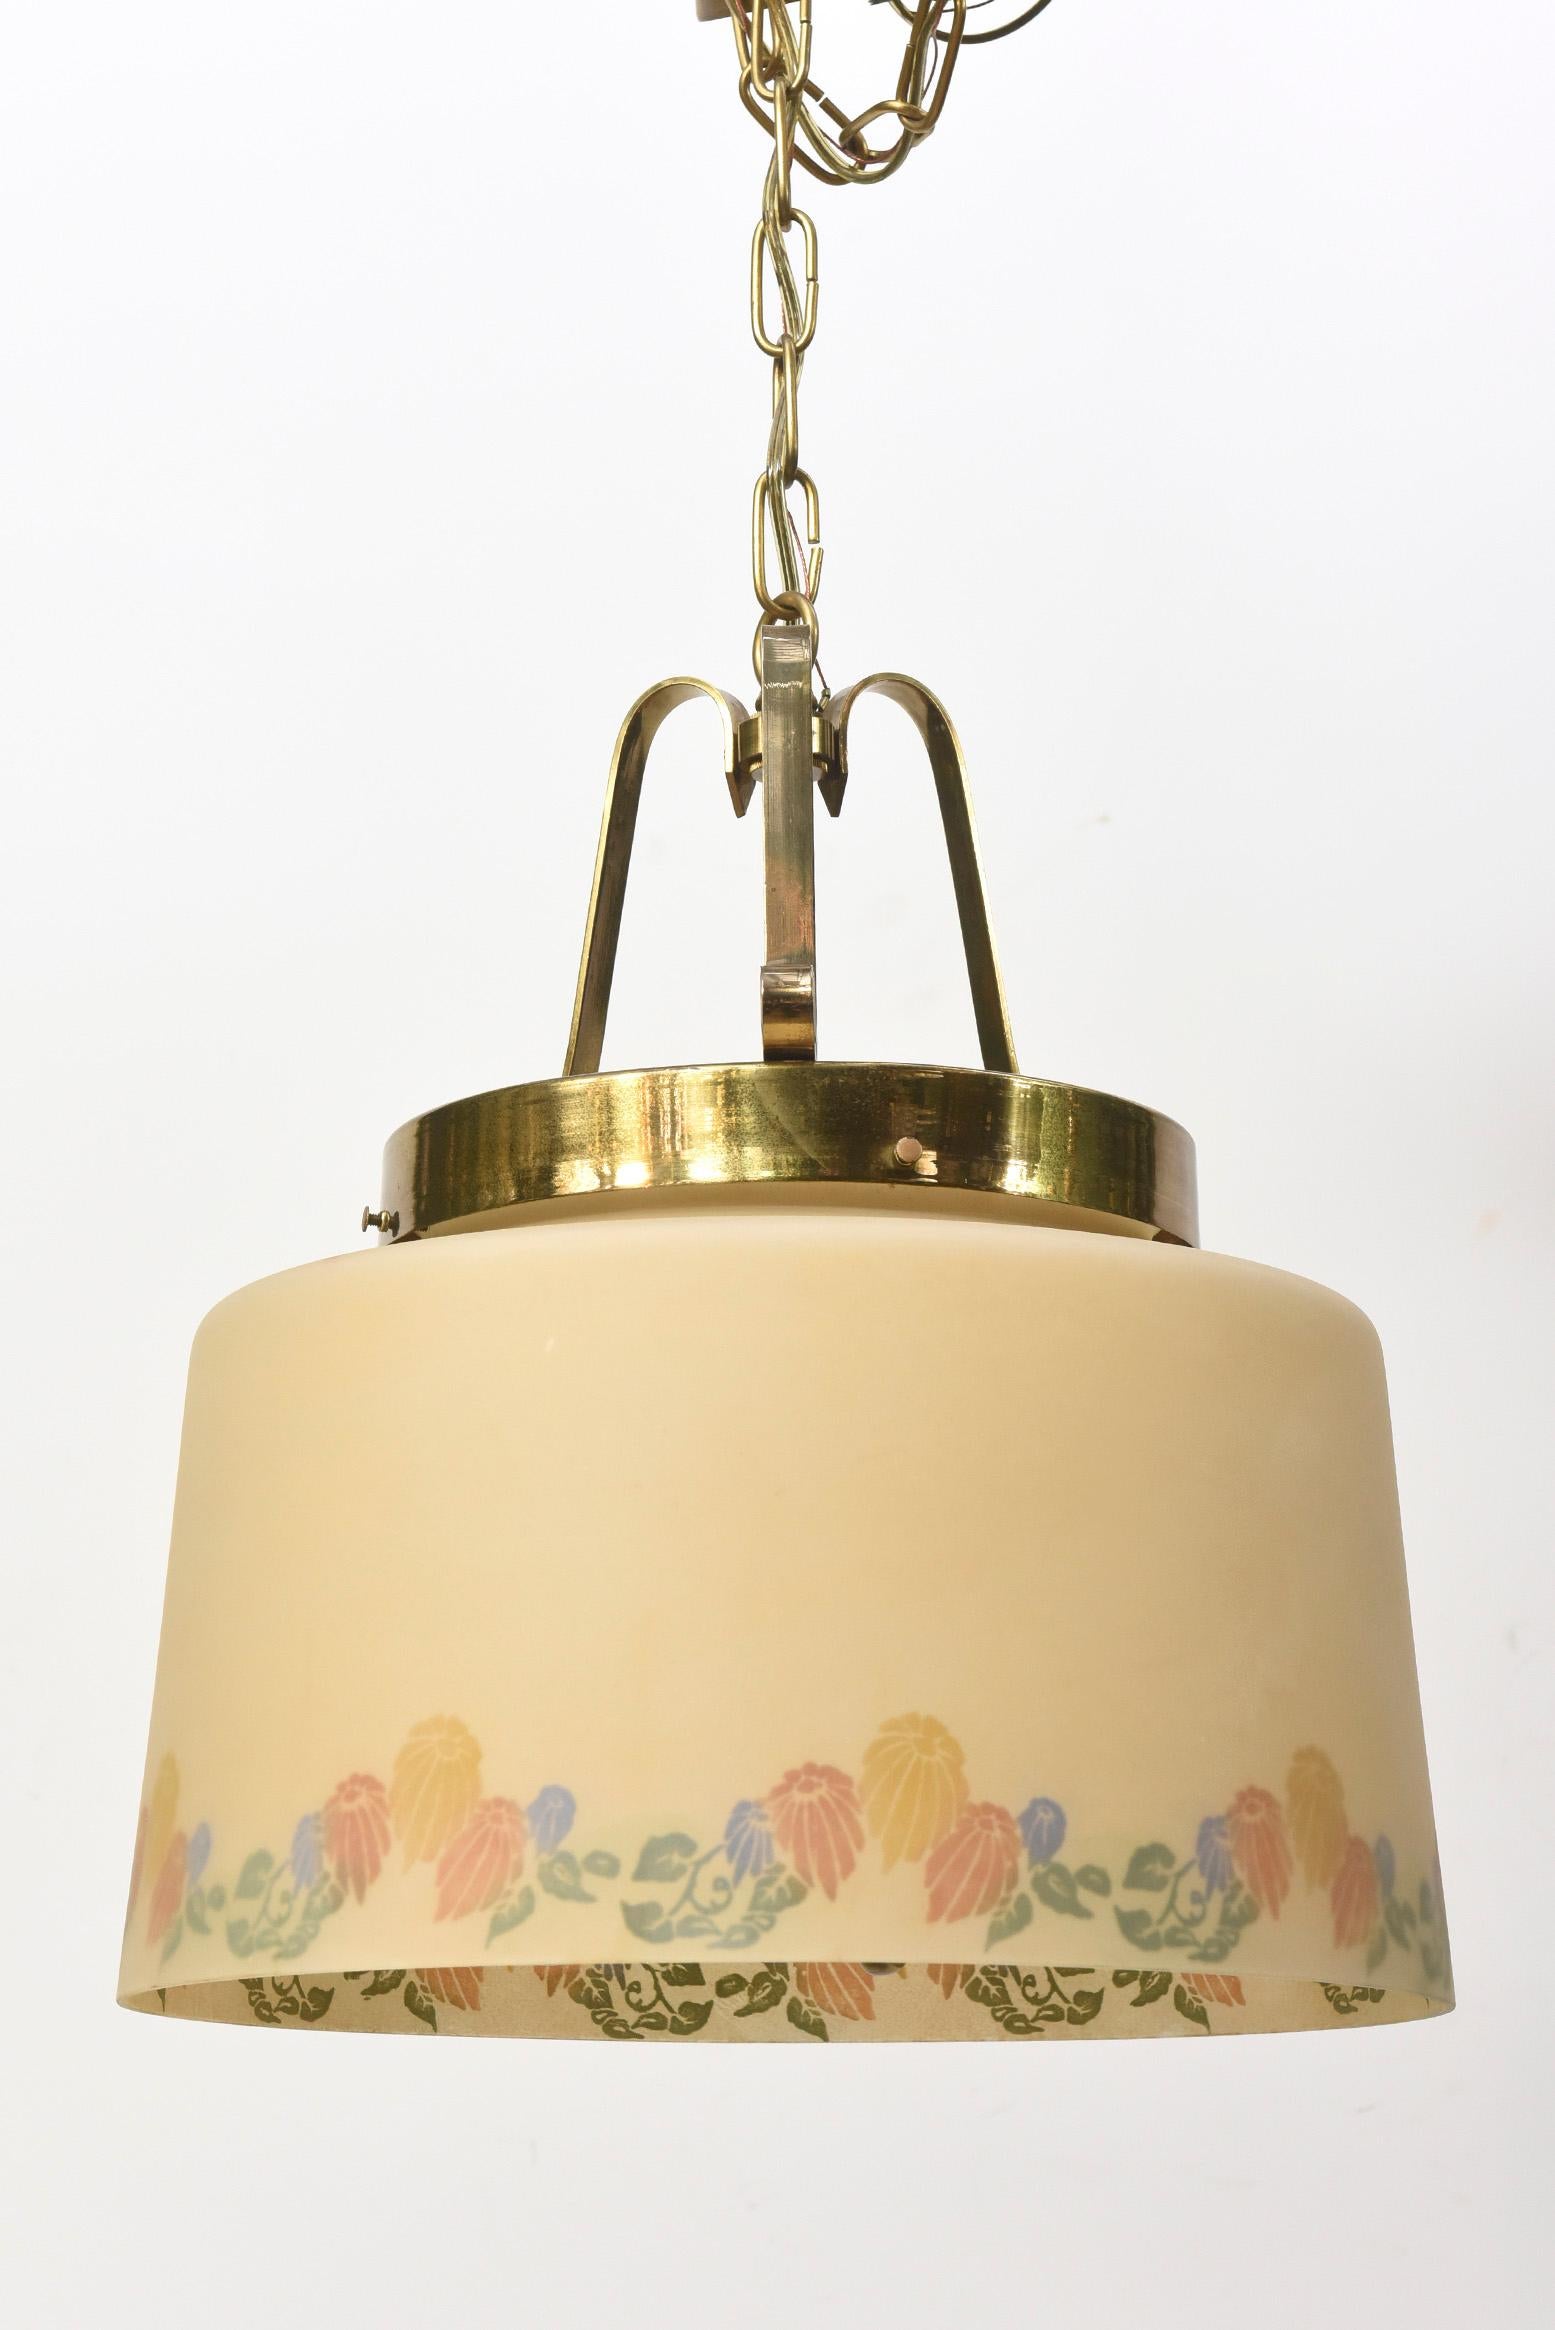 American Three Light Lightolier Fixture with Vintage Floral Glass Shade For Sale